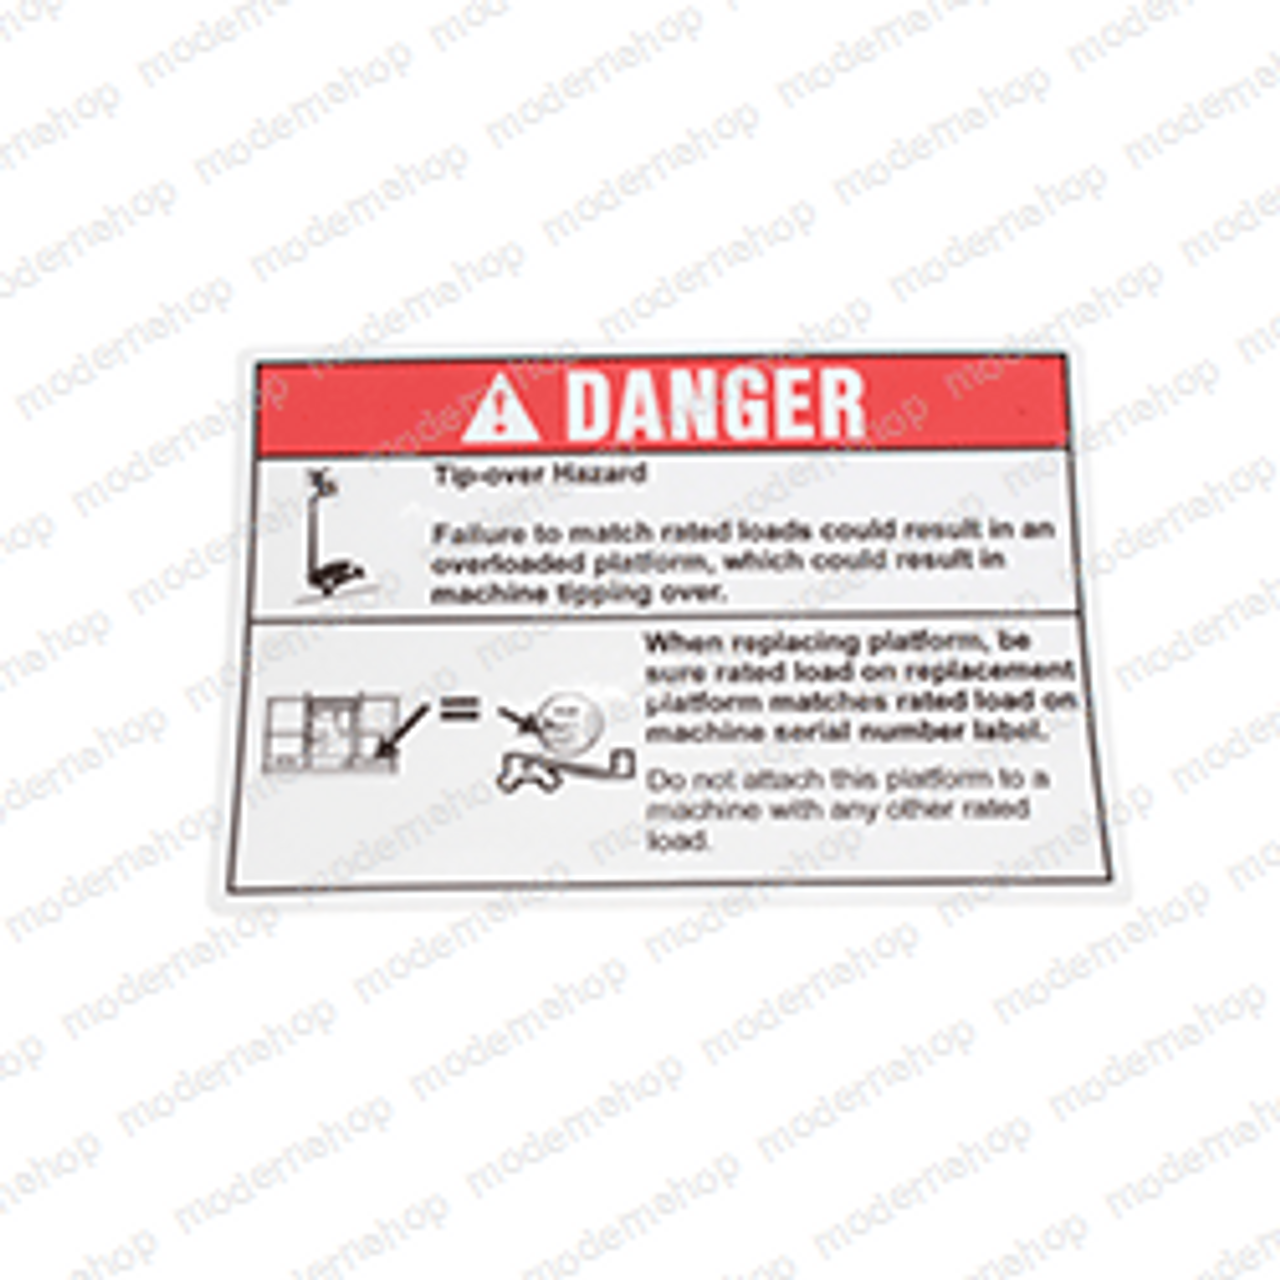 1000262: Genie DECAL DANGER TIP OVER PLAT